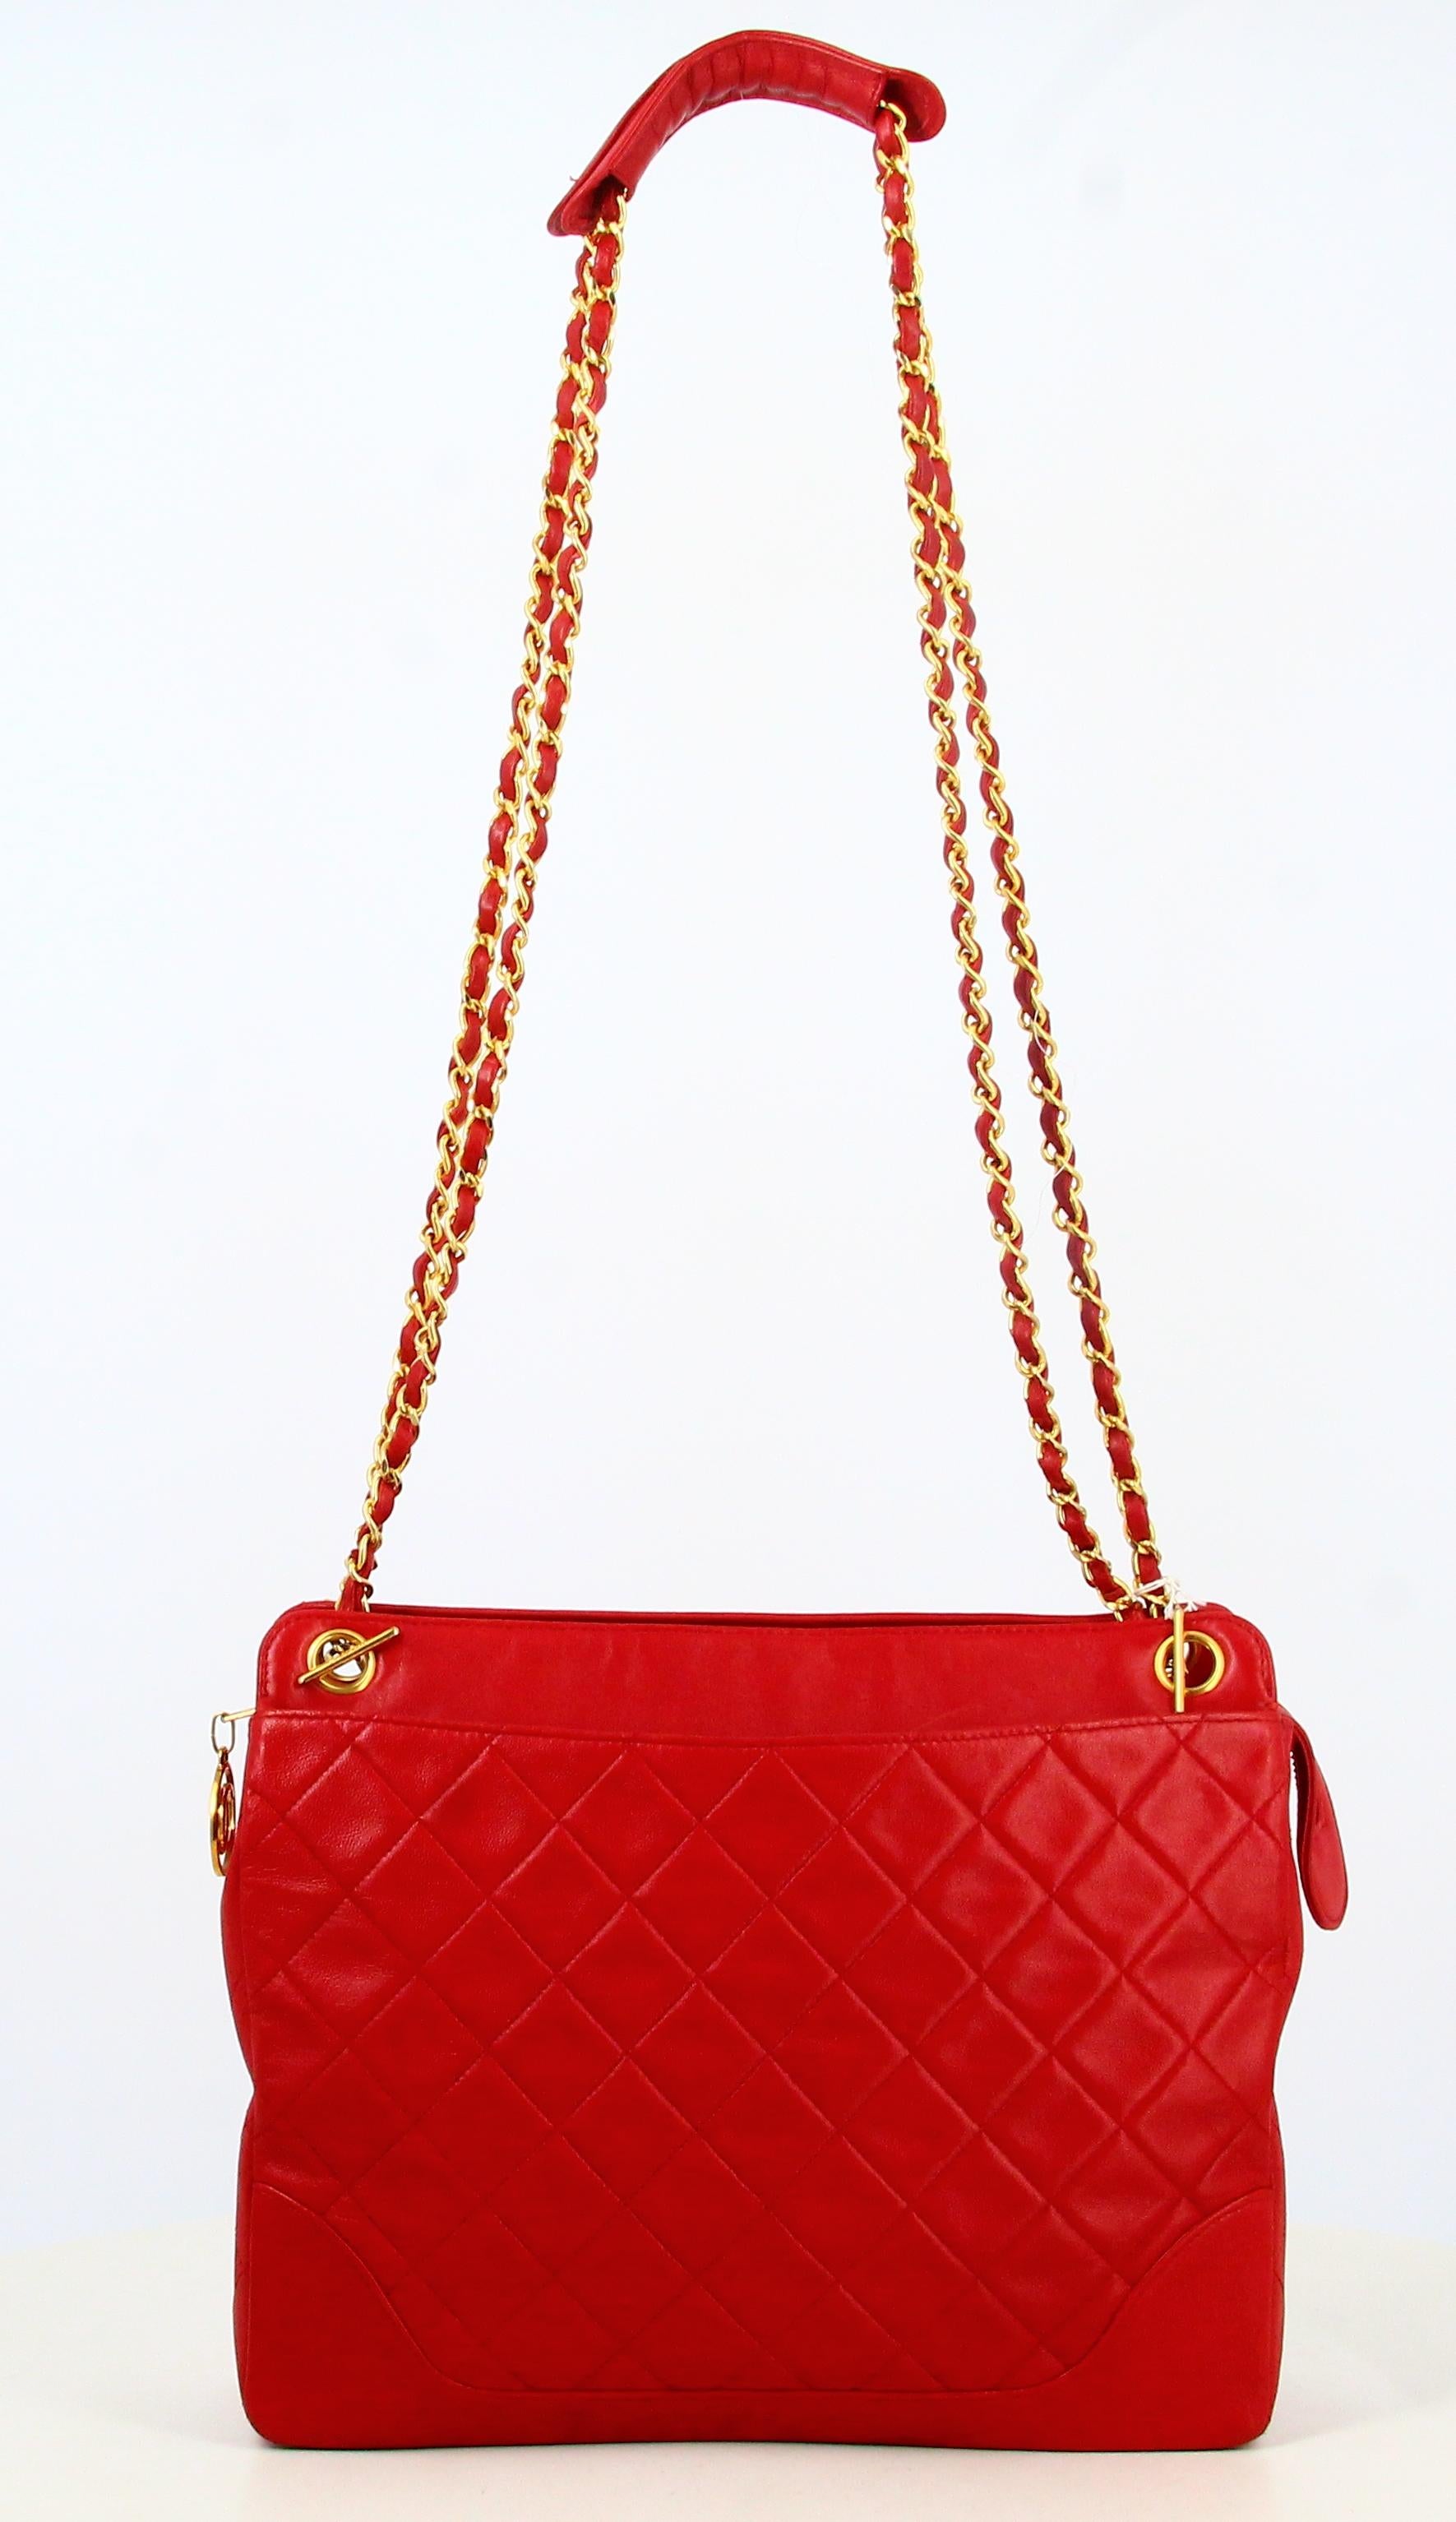 1989 Handbag Chanel quilted leather Red 

- Good condition. Slight traces of wear with time. 
- Chanel Handbag 
- Red quilted leather 
- Two red leather straps and golden chain 
- Two pockets on the front and back of the bag 
- Interior: Red leather